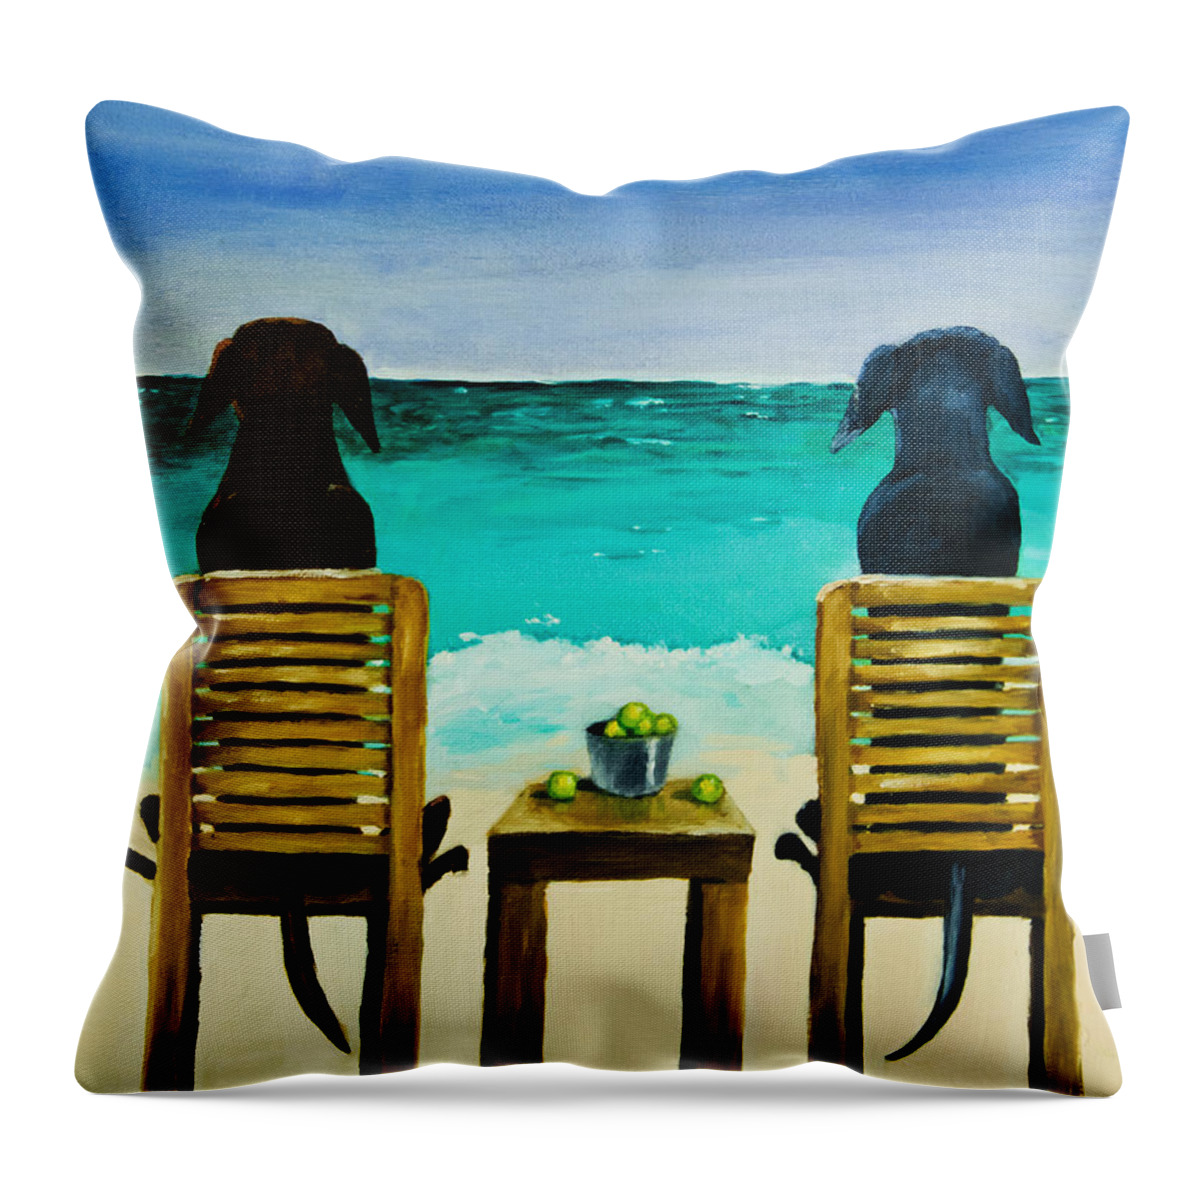 Labrador Retriever Throw Pillow featuring the painting Beach Bums by Roger Wedegis